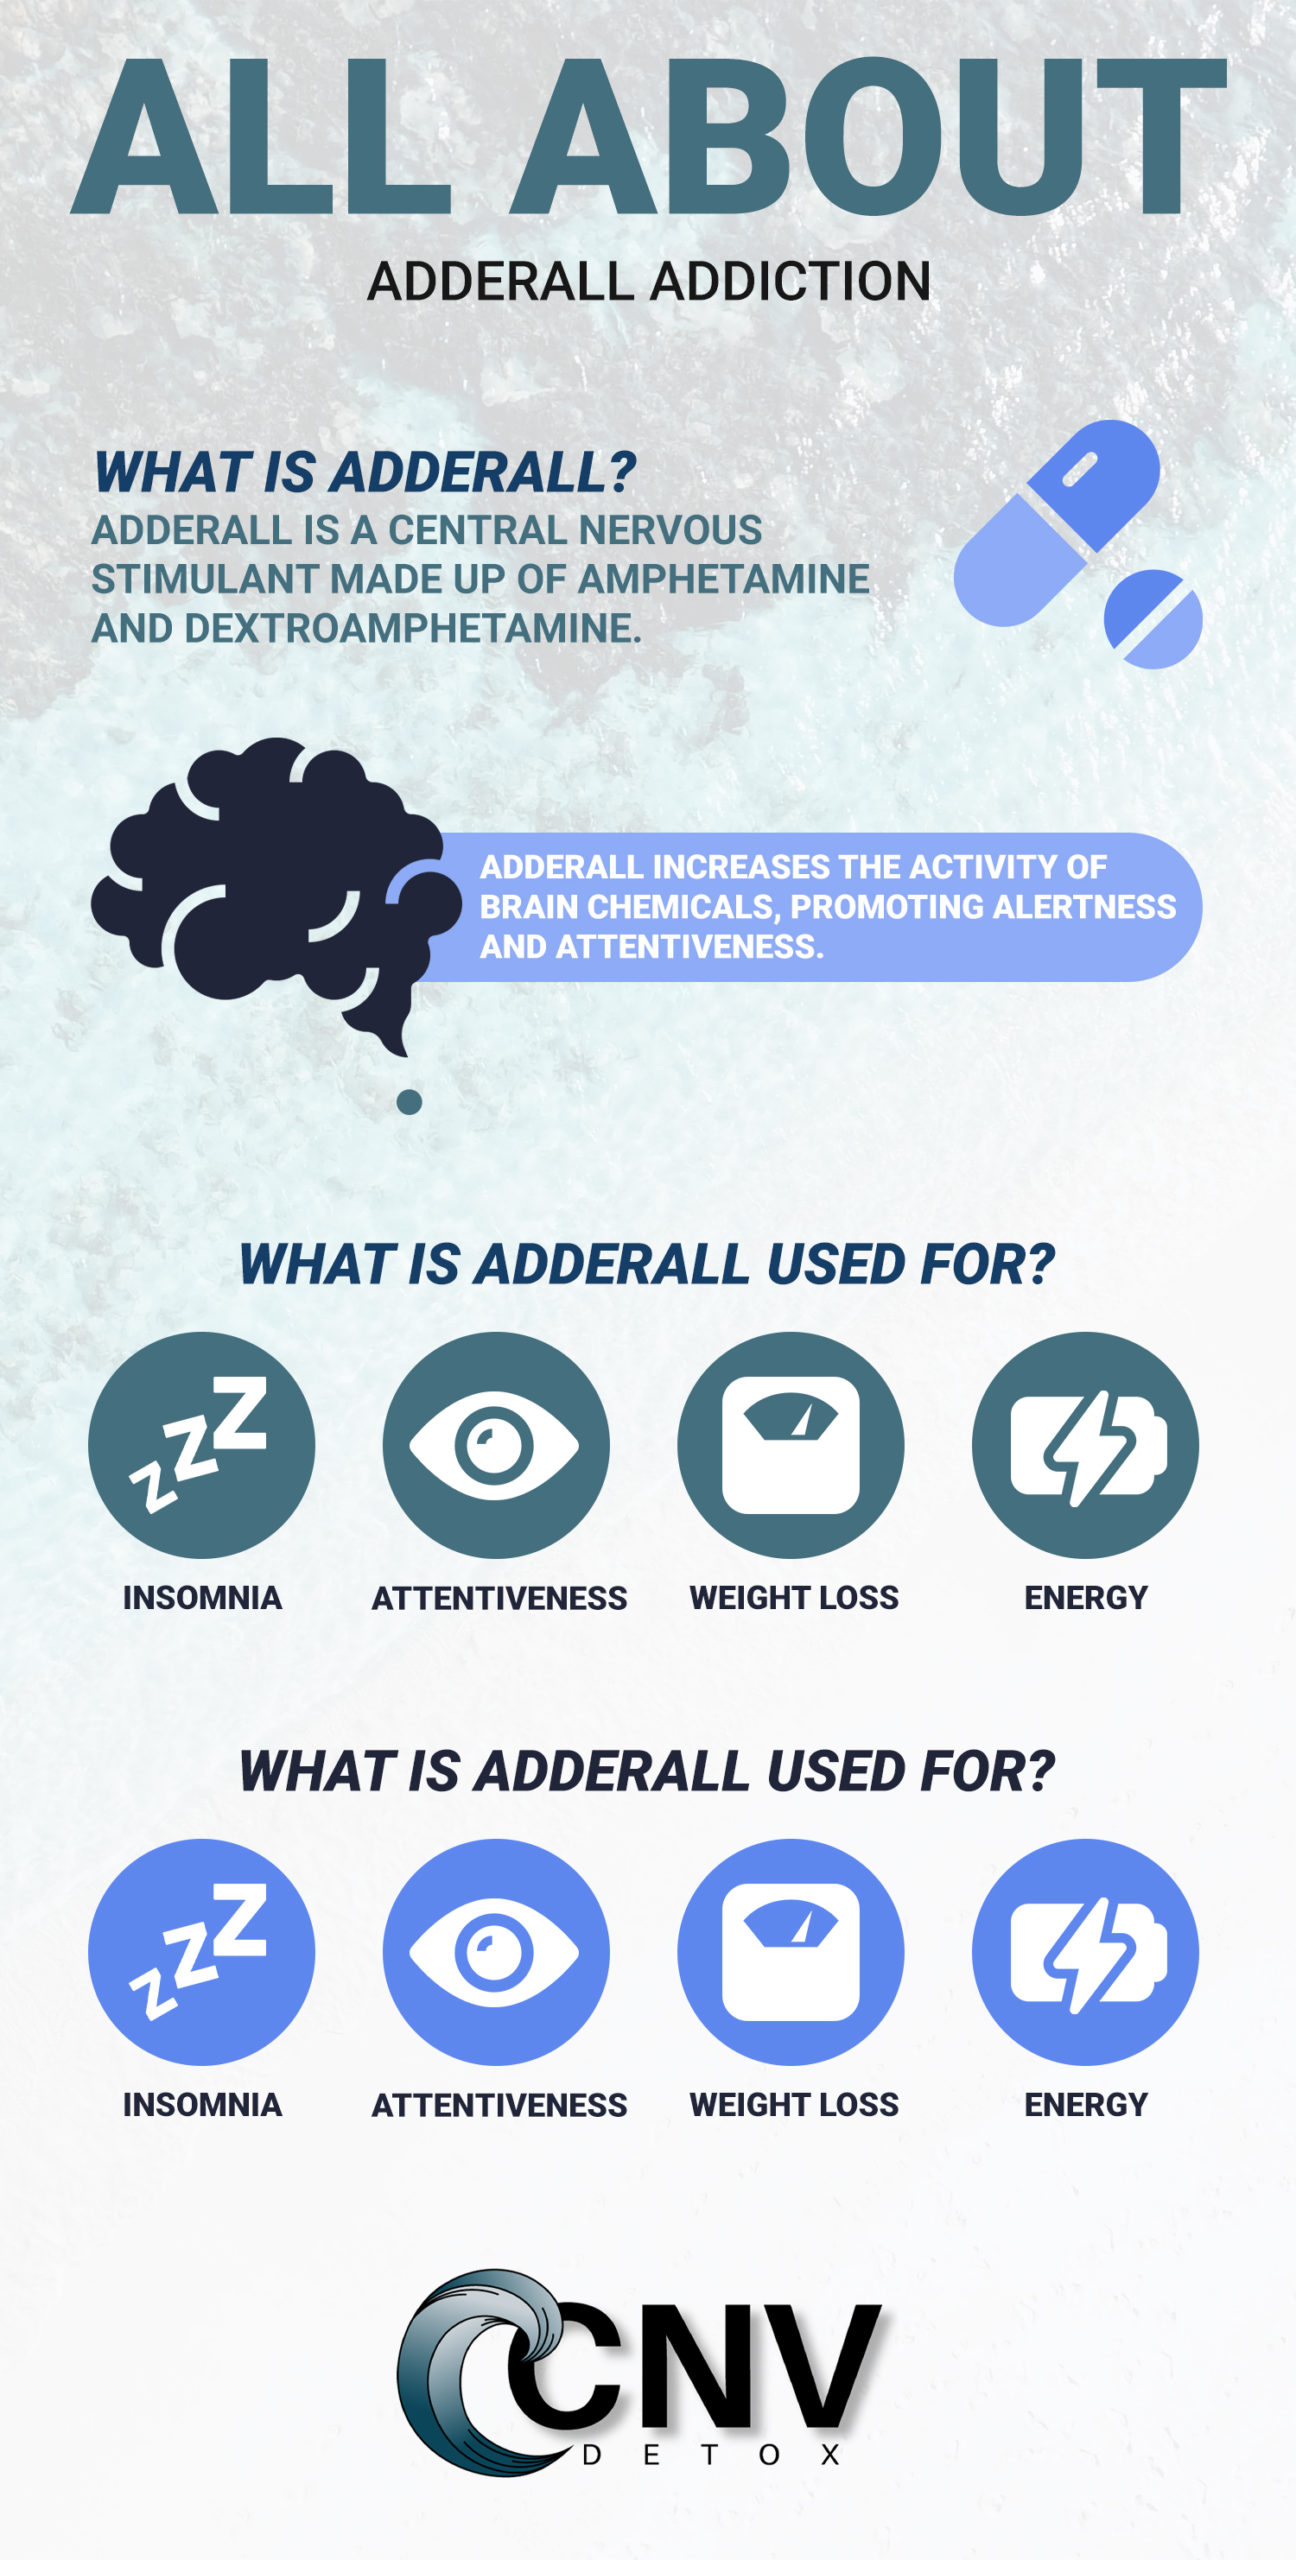 Can You Become Addicted to Adderall